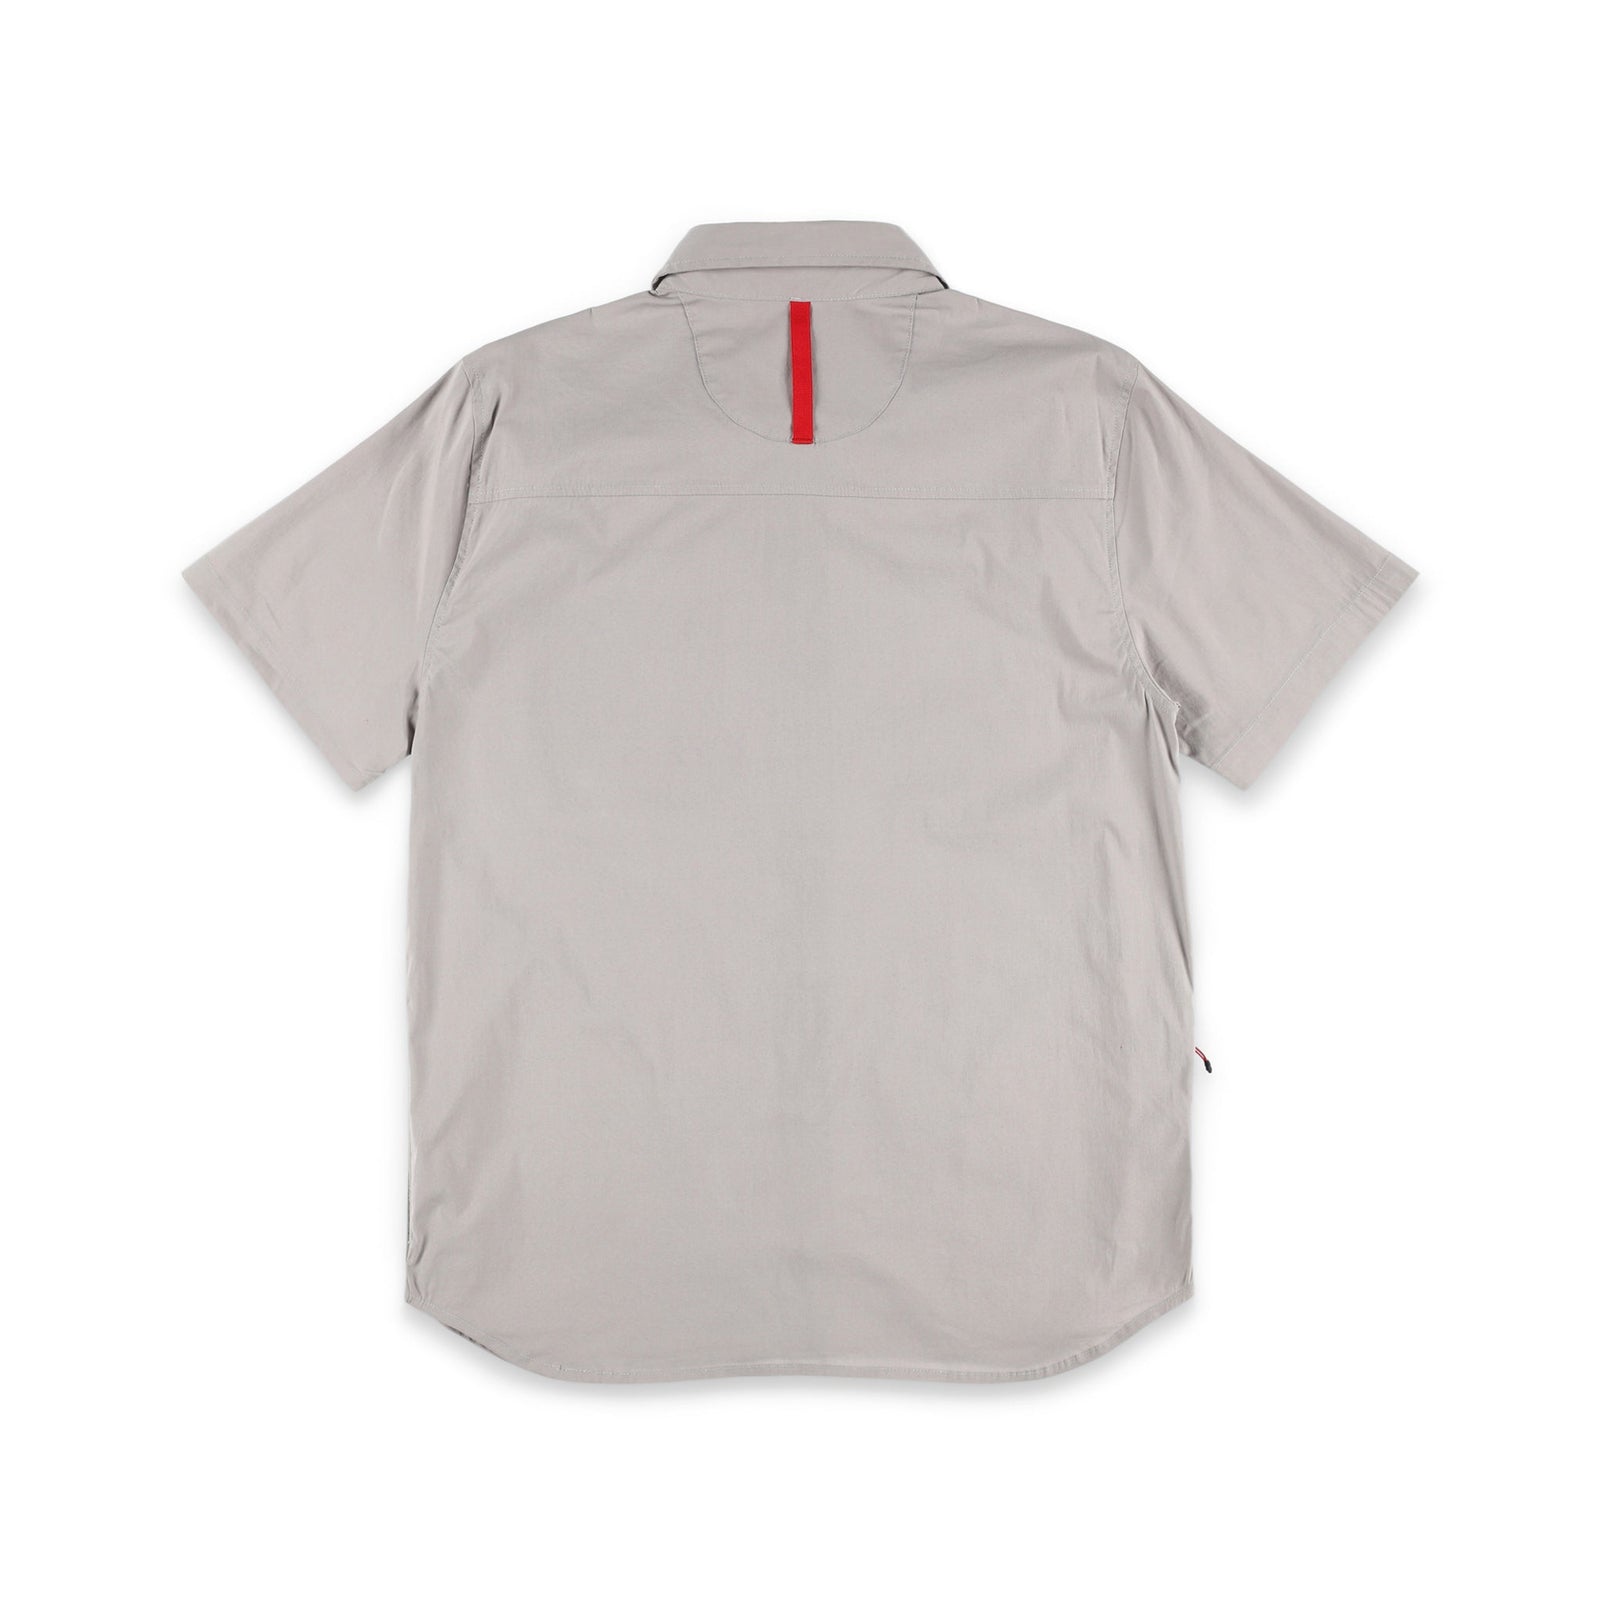 PackFast Packing Band on Topo Designs Men's Global Shirt Short Sleeve 30+ UPF rated travel shirt in "Light Gray".